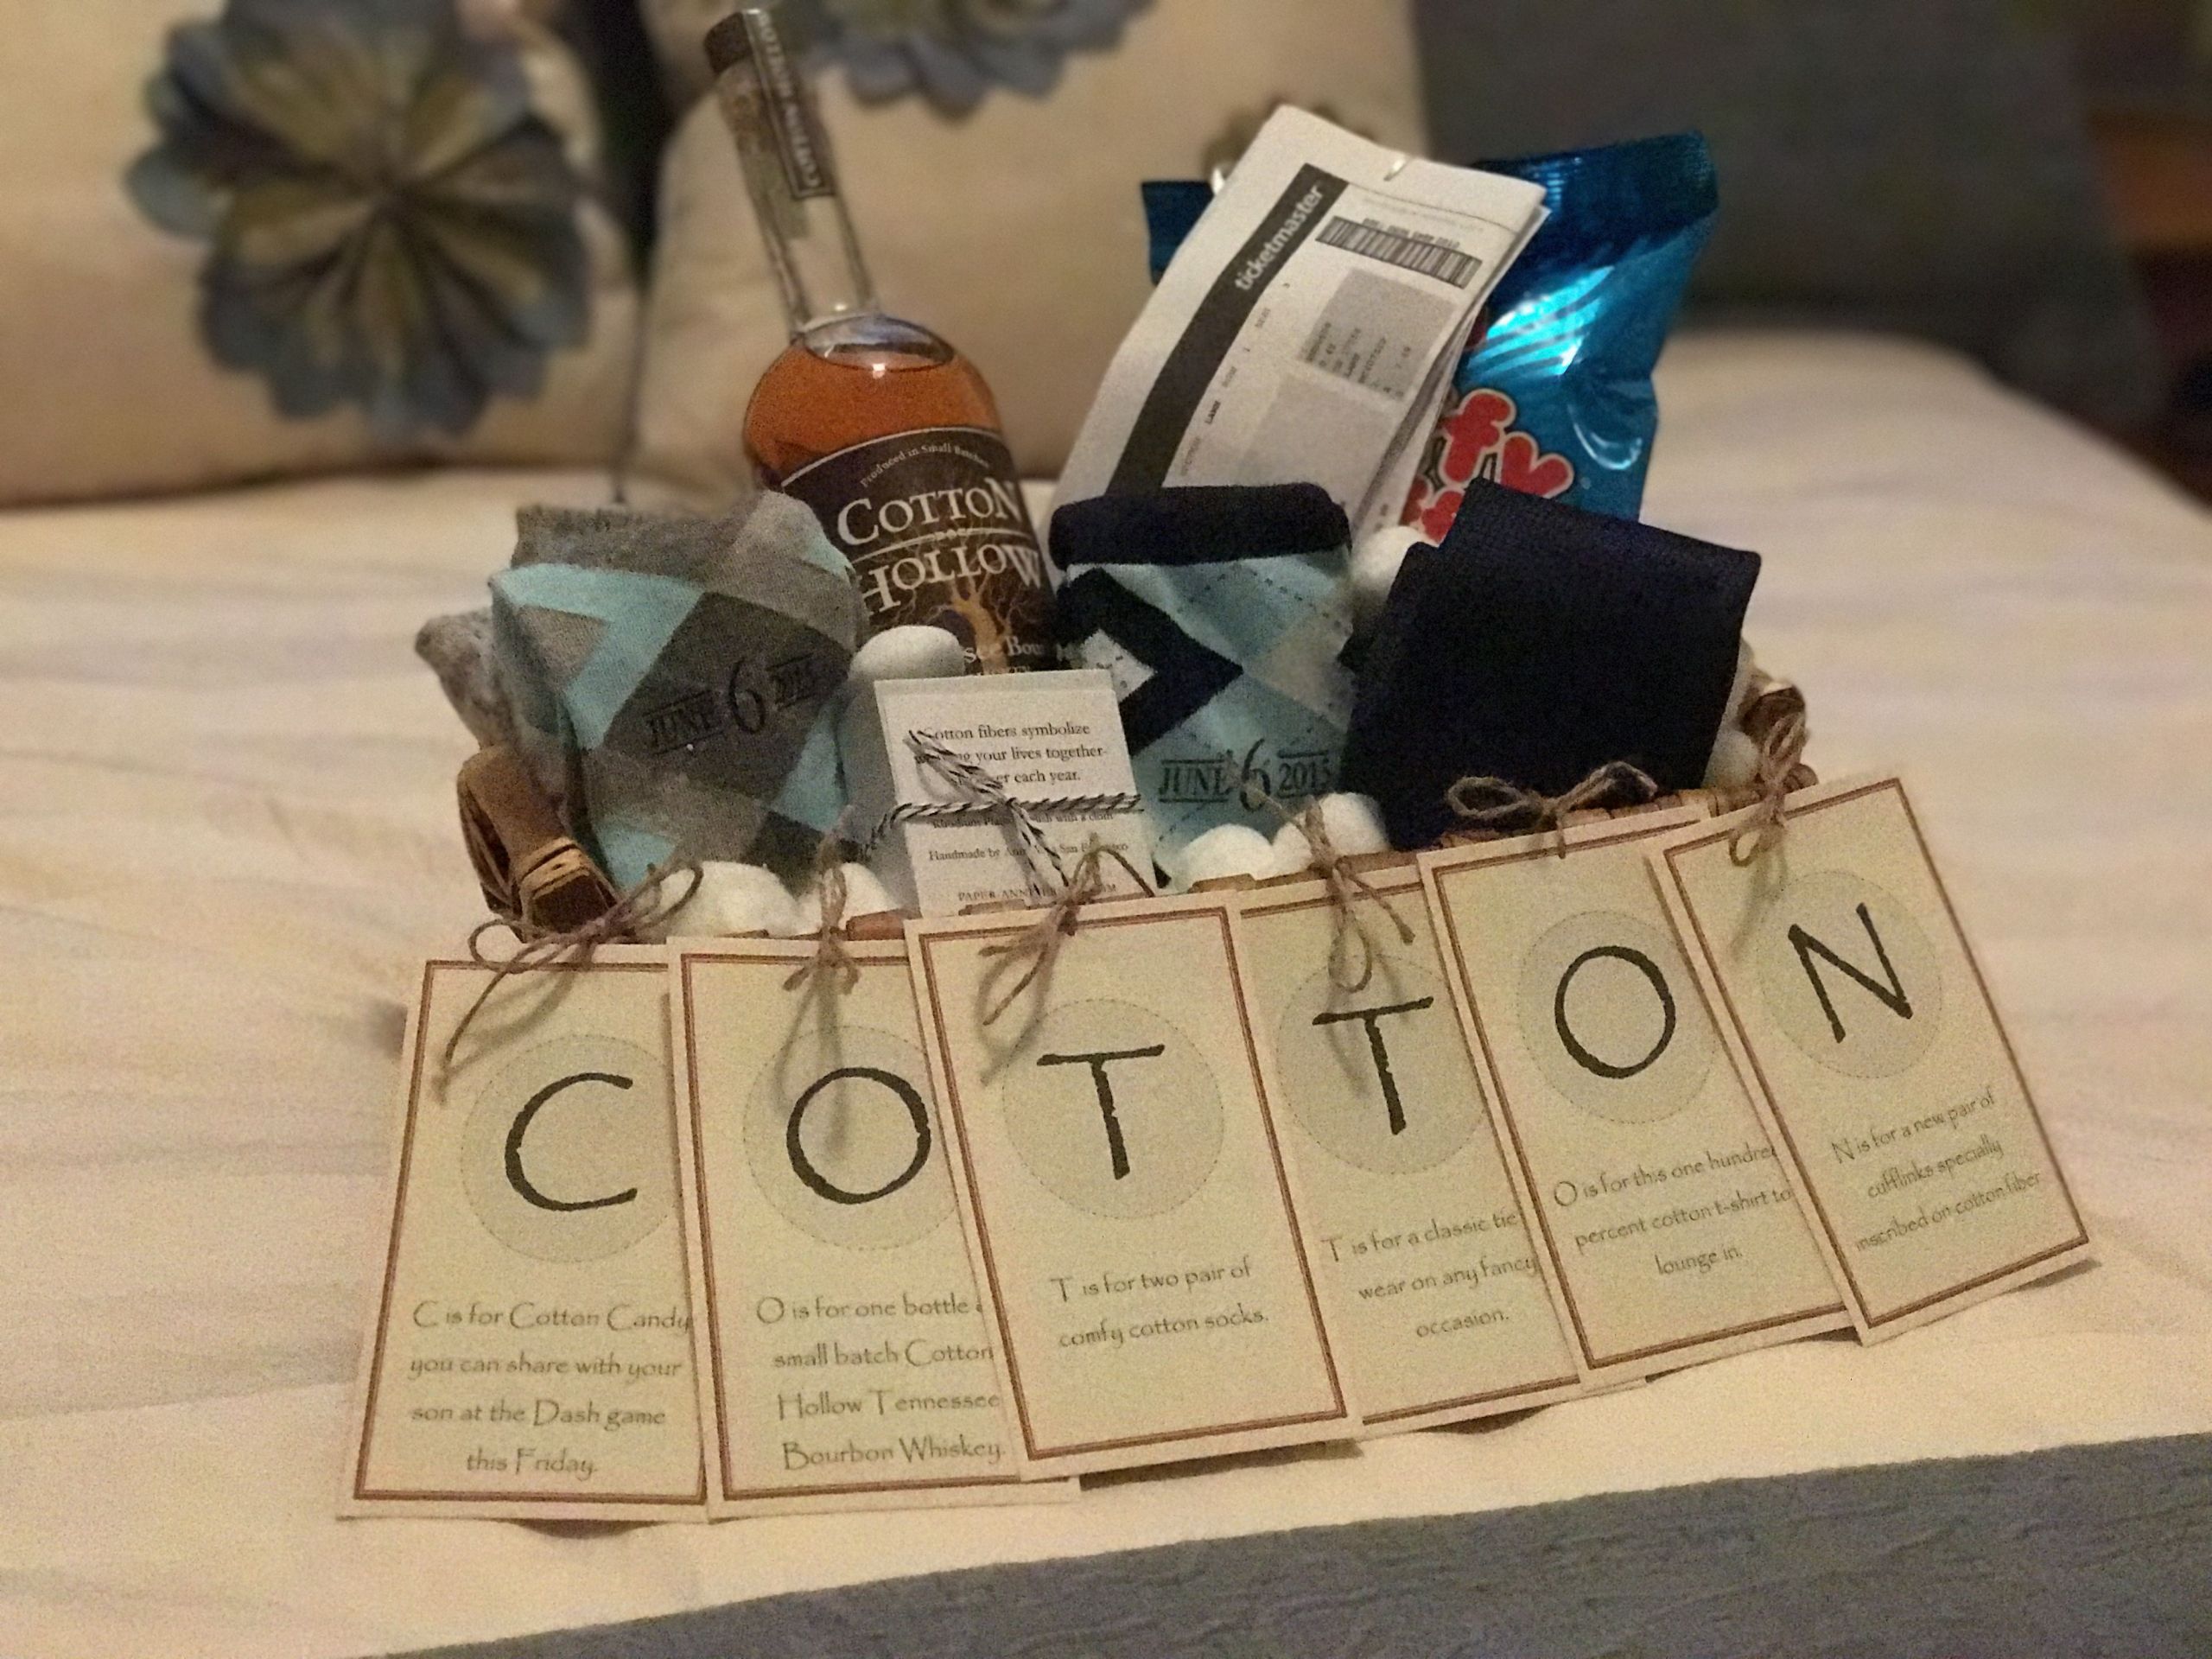 Cotton Anniversary Gift Ideas
 The "Cotton" Anniversary Gift for Him